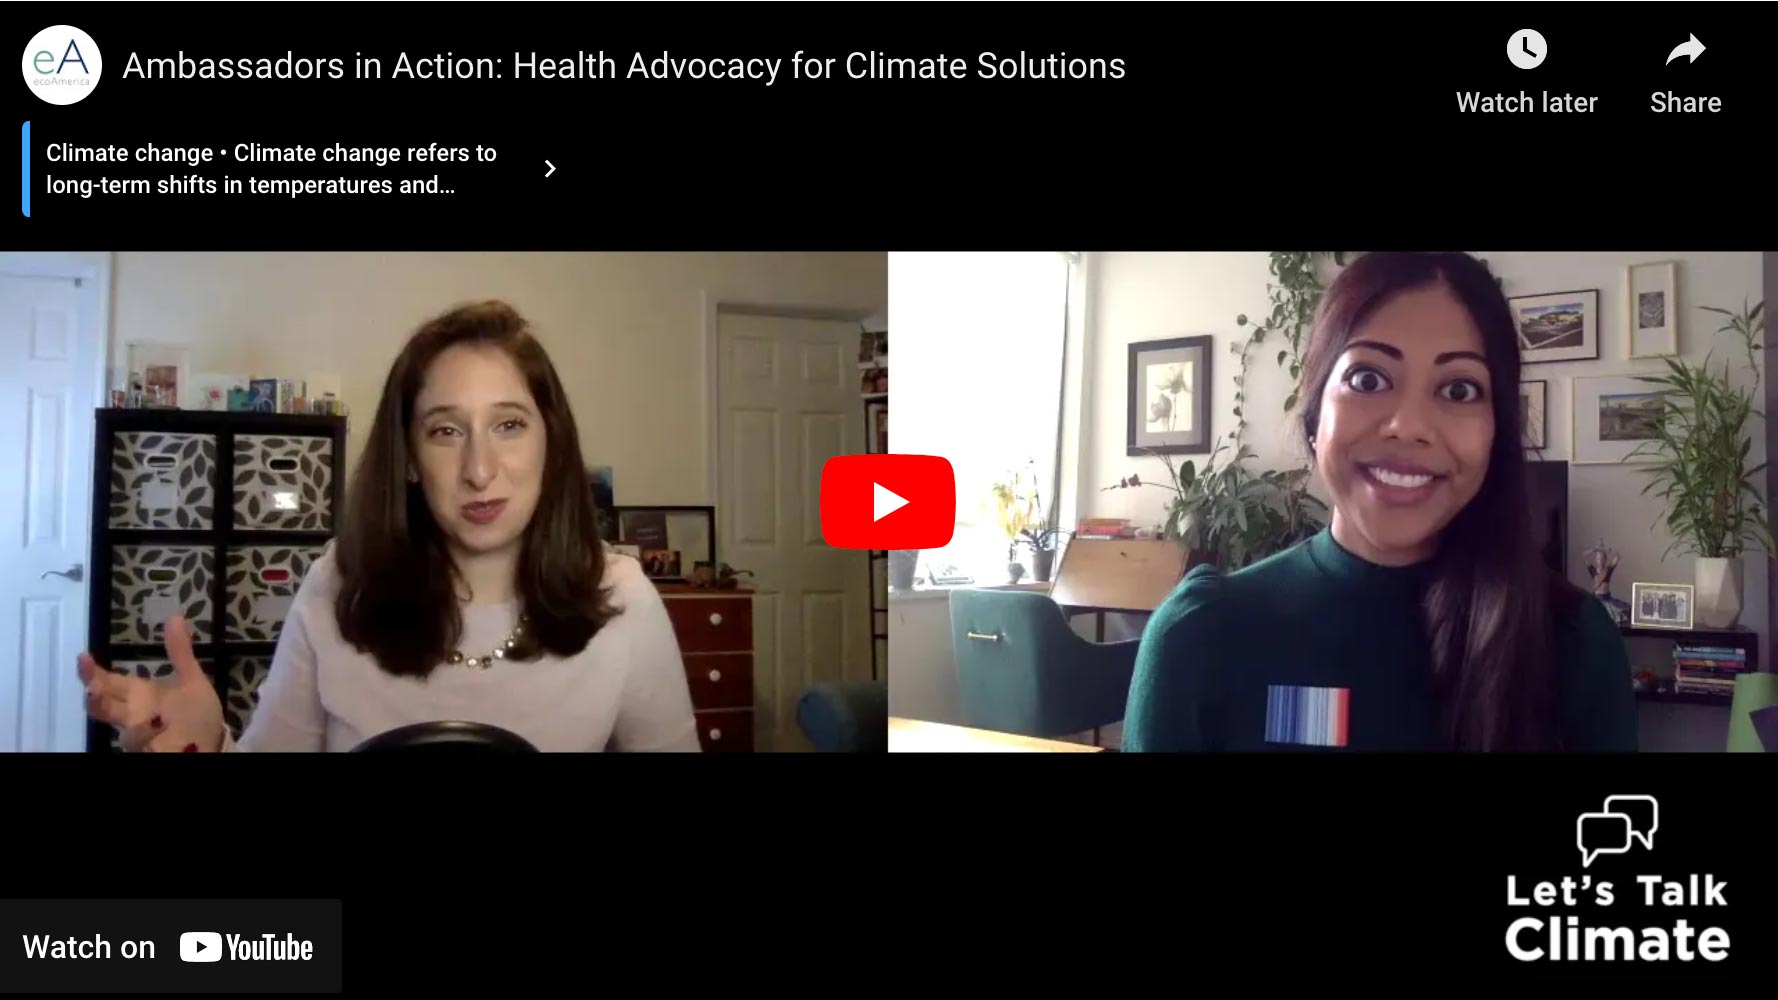 Ambassadors in Action: Health Advocacy for Climate Solutions